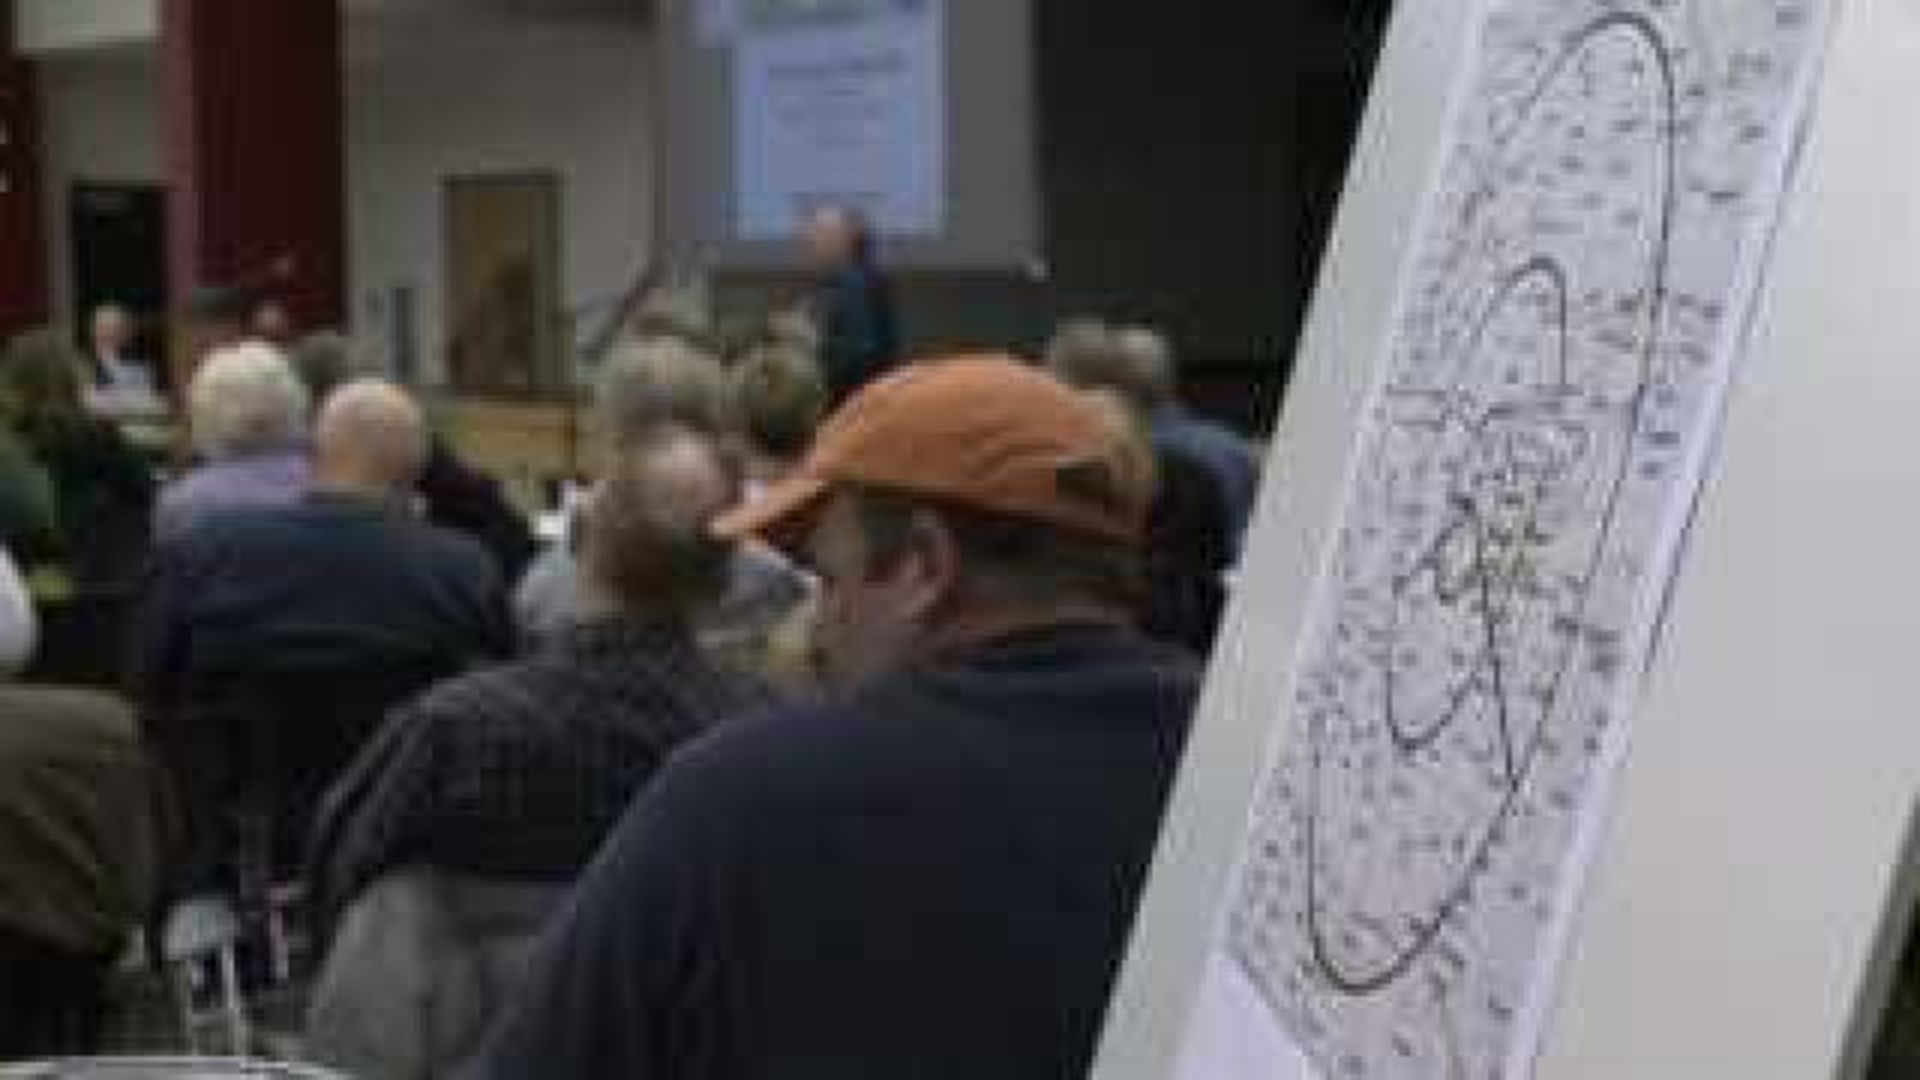 Hundreds Hear About Potential Power Plant